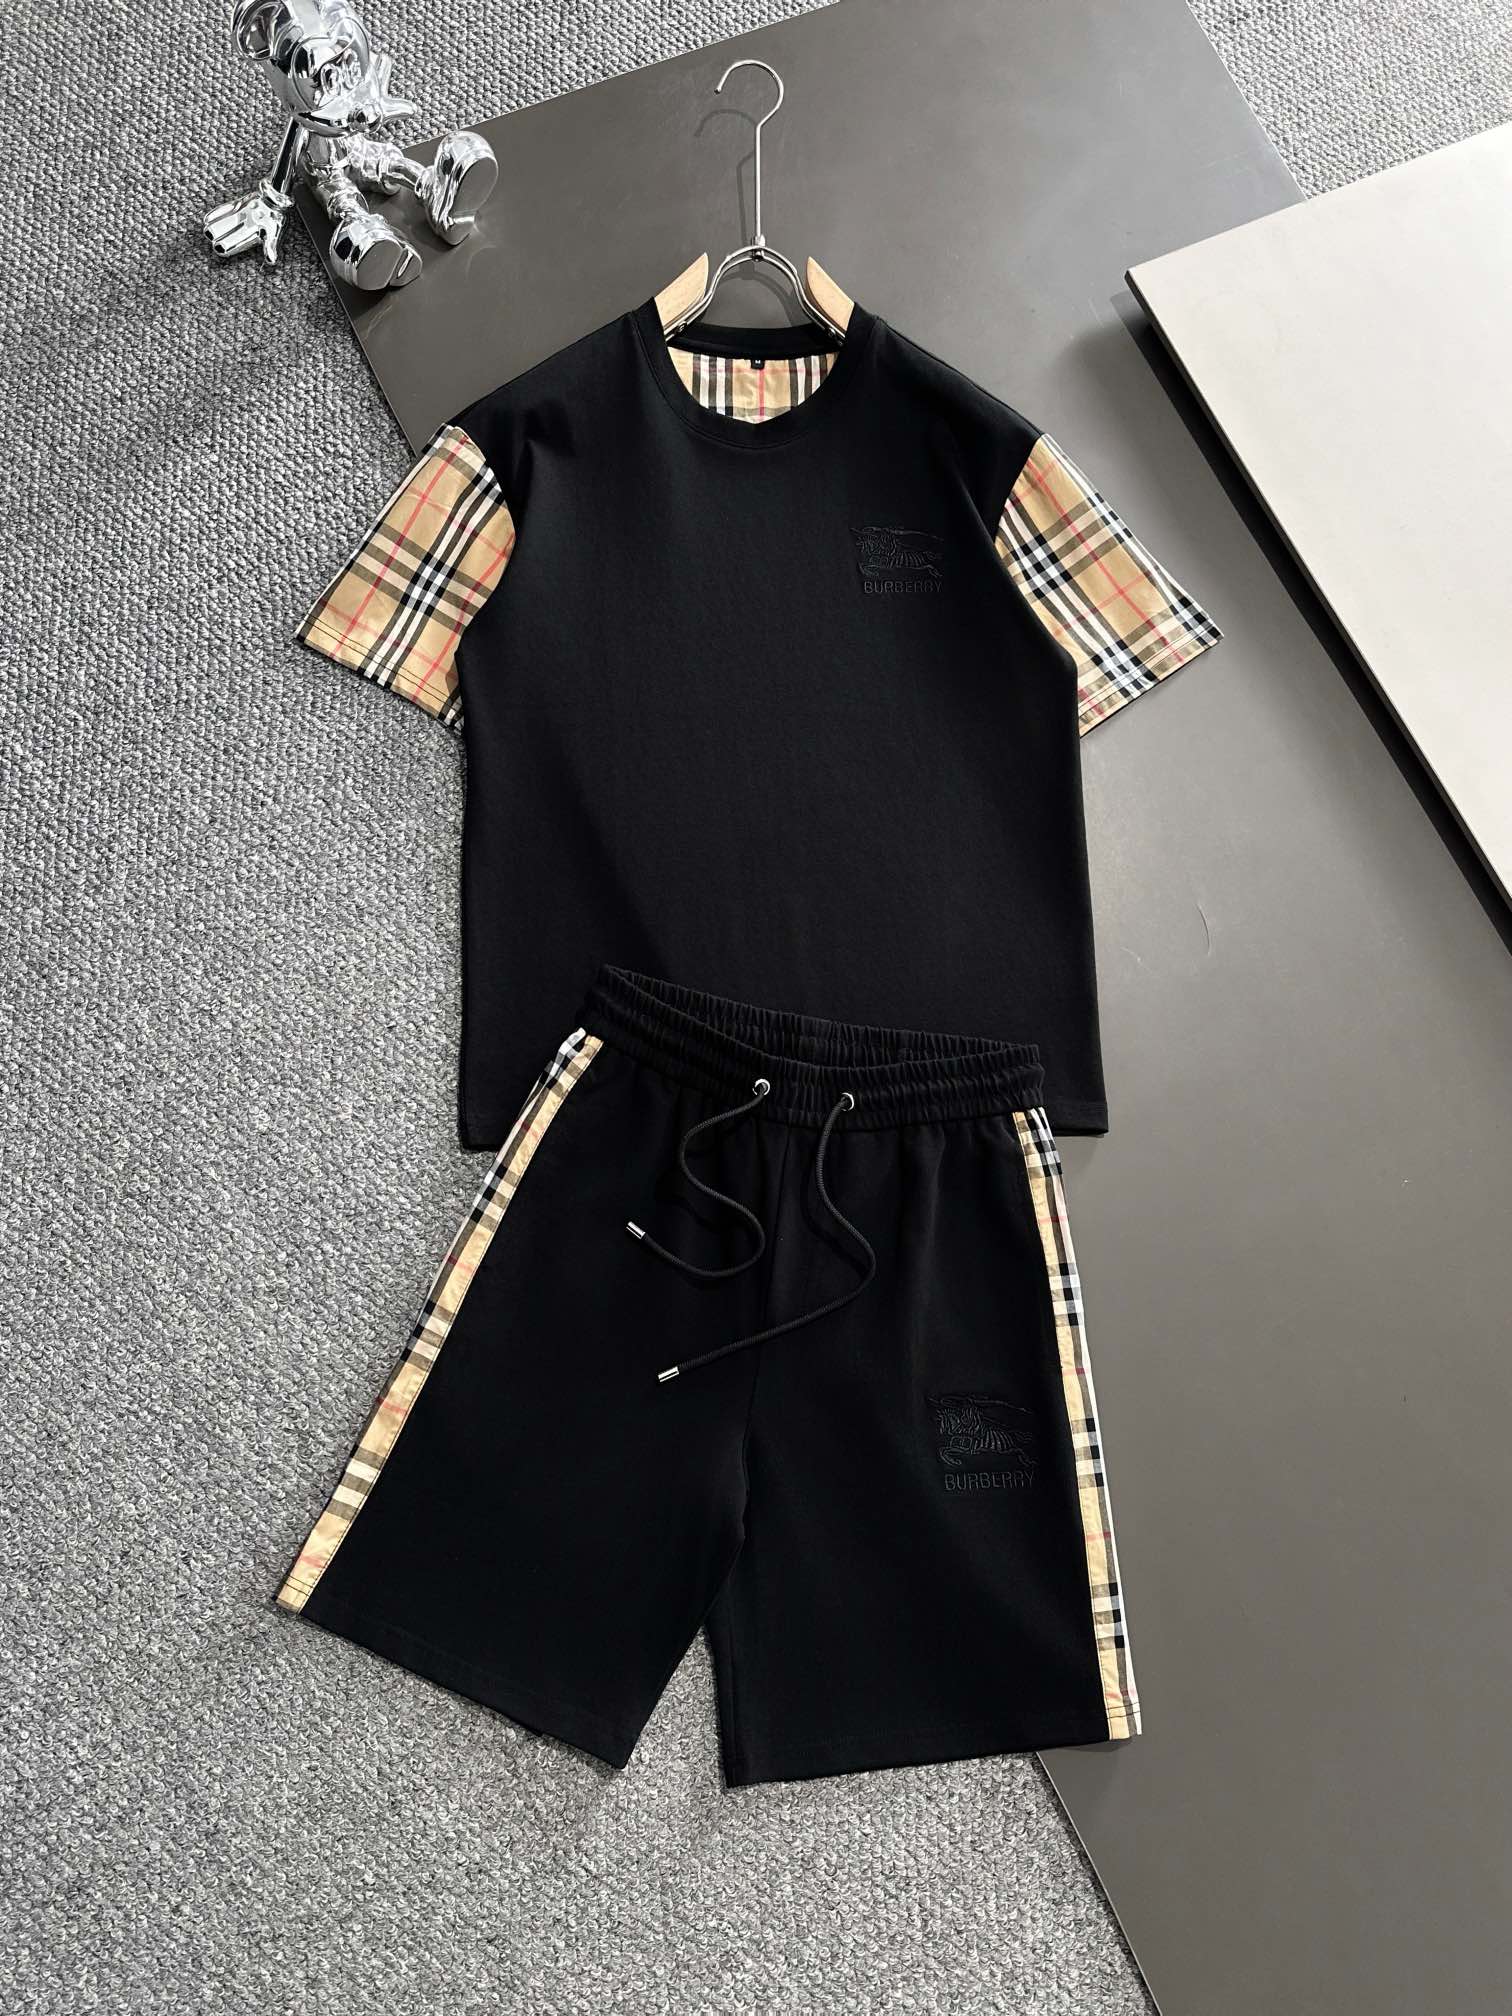 Burberry Clothing Shorts T-Shirt Two Piece Outfits & Matching Sets Cotton Fashion Short Sleeve